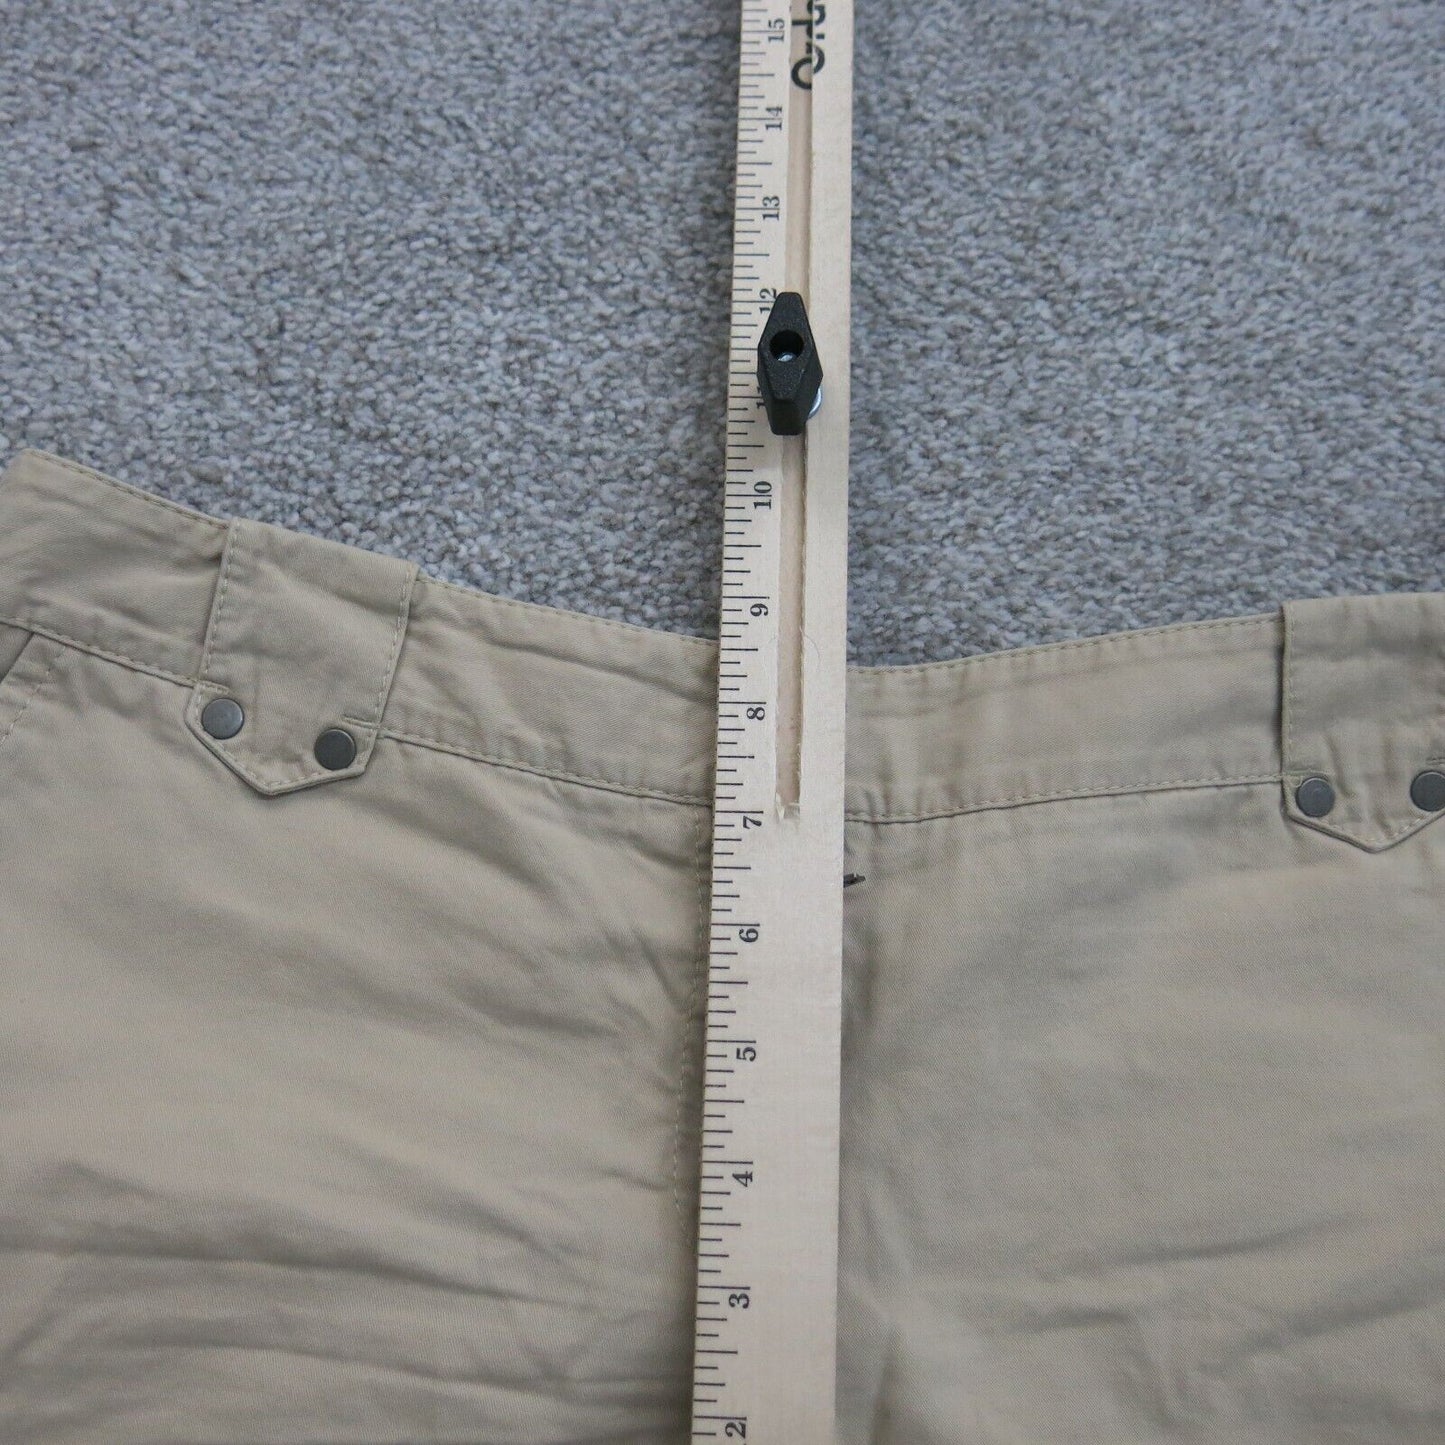 Ann Taylor Womens Chino Shorts Mid Rise Flat Front Slash Pockets Beige Size 6